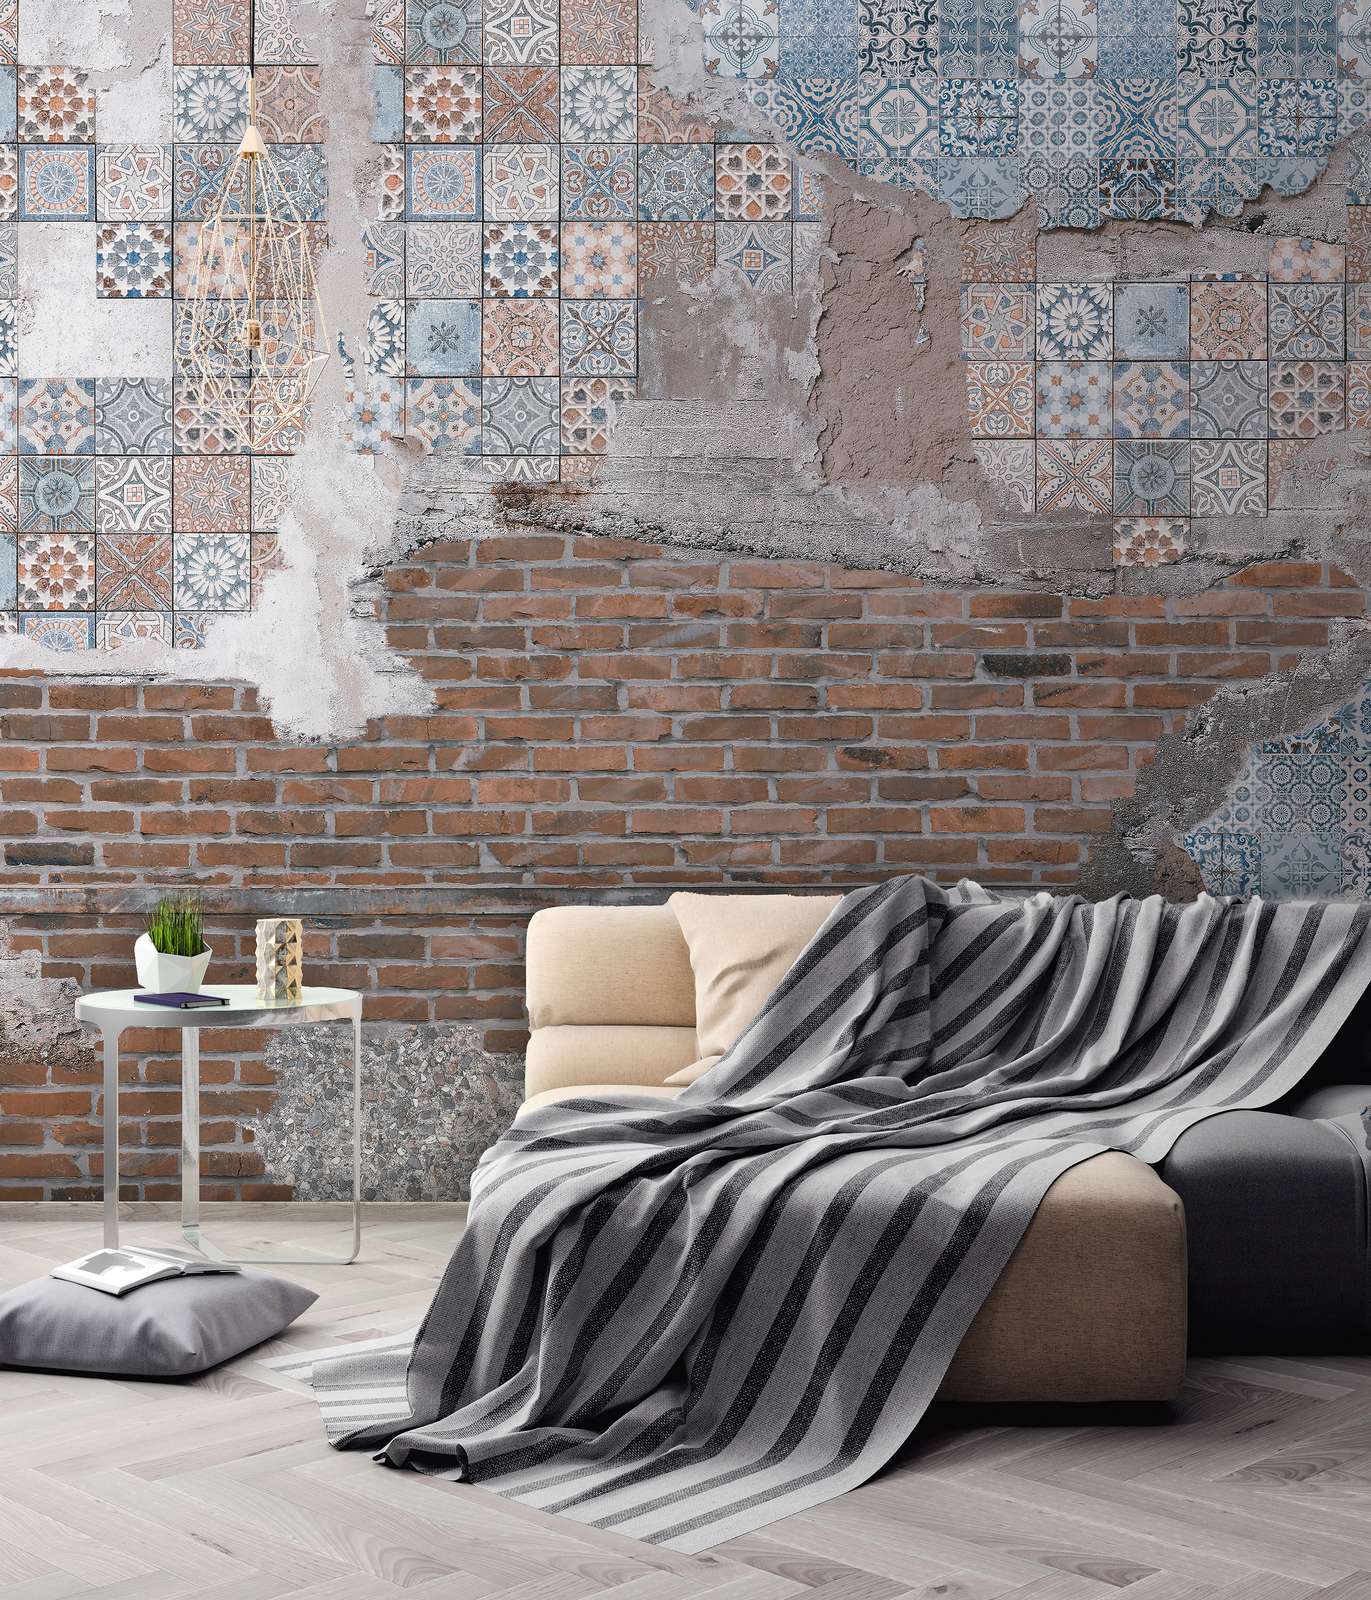             Photo wallpaper Brick Wall with Plastered Mosaic Stones - Brown, Blue, Grey
        